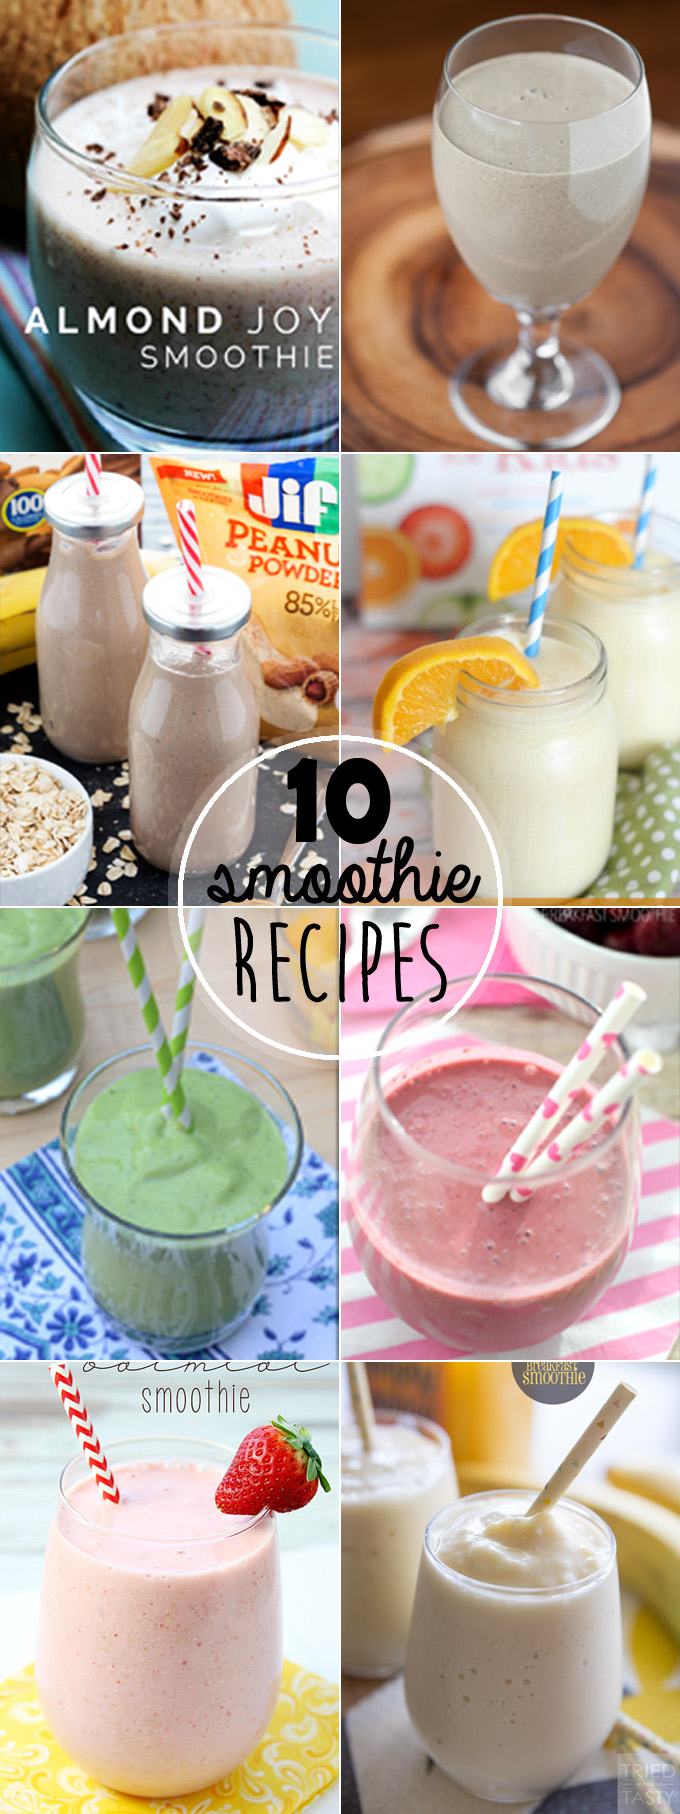 Top 10 Healthy Smoothies for Breakfast